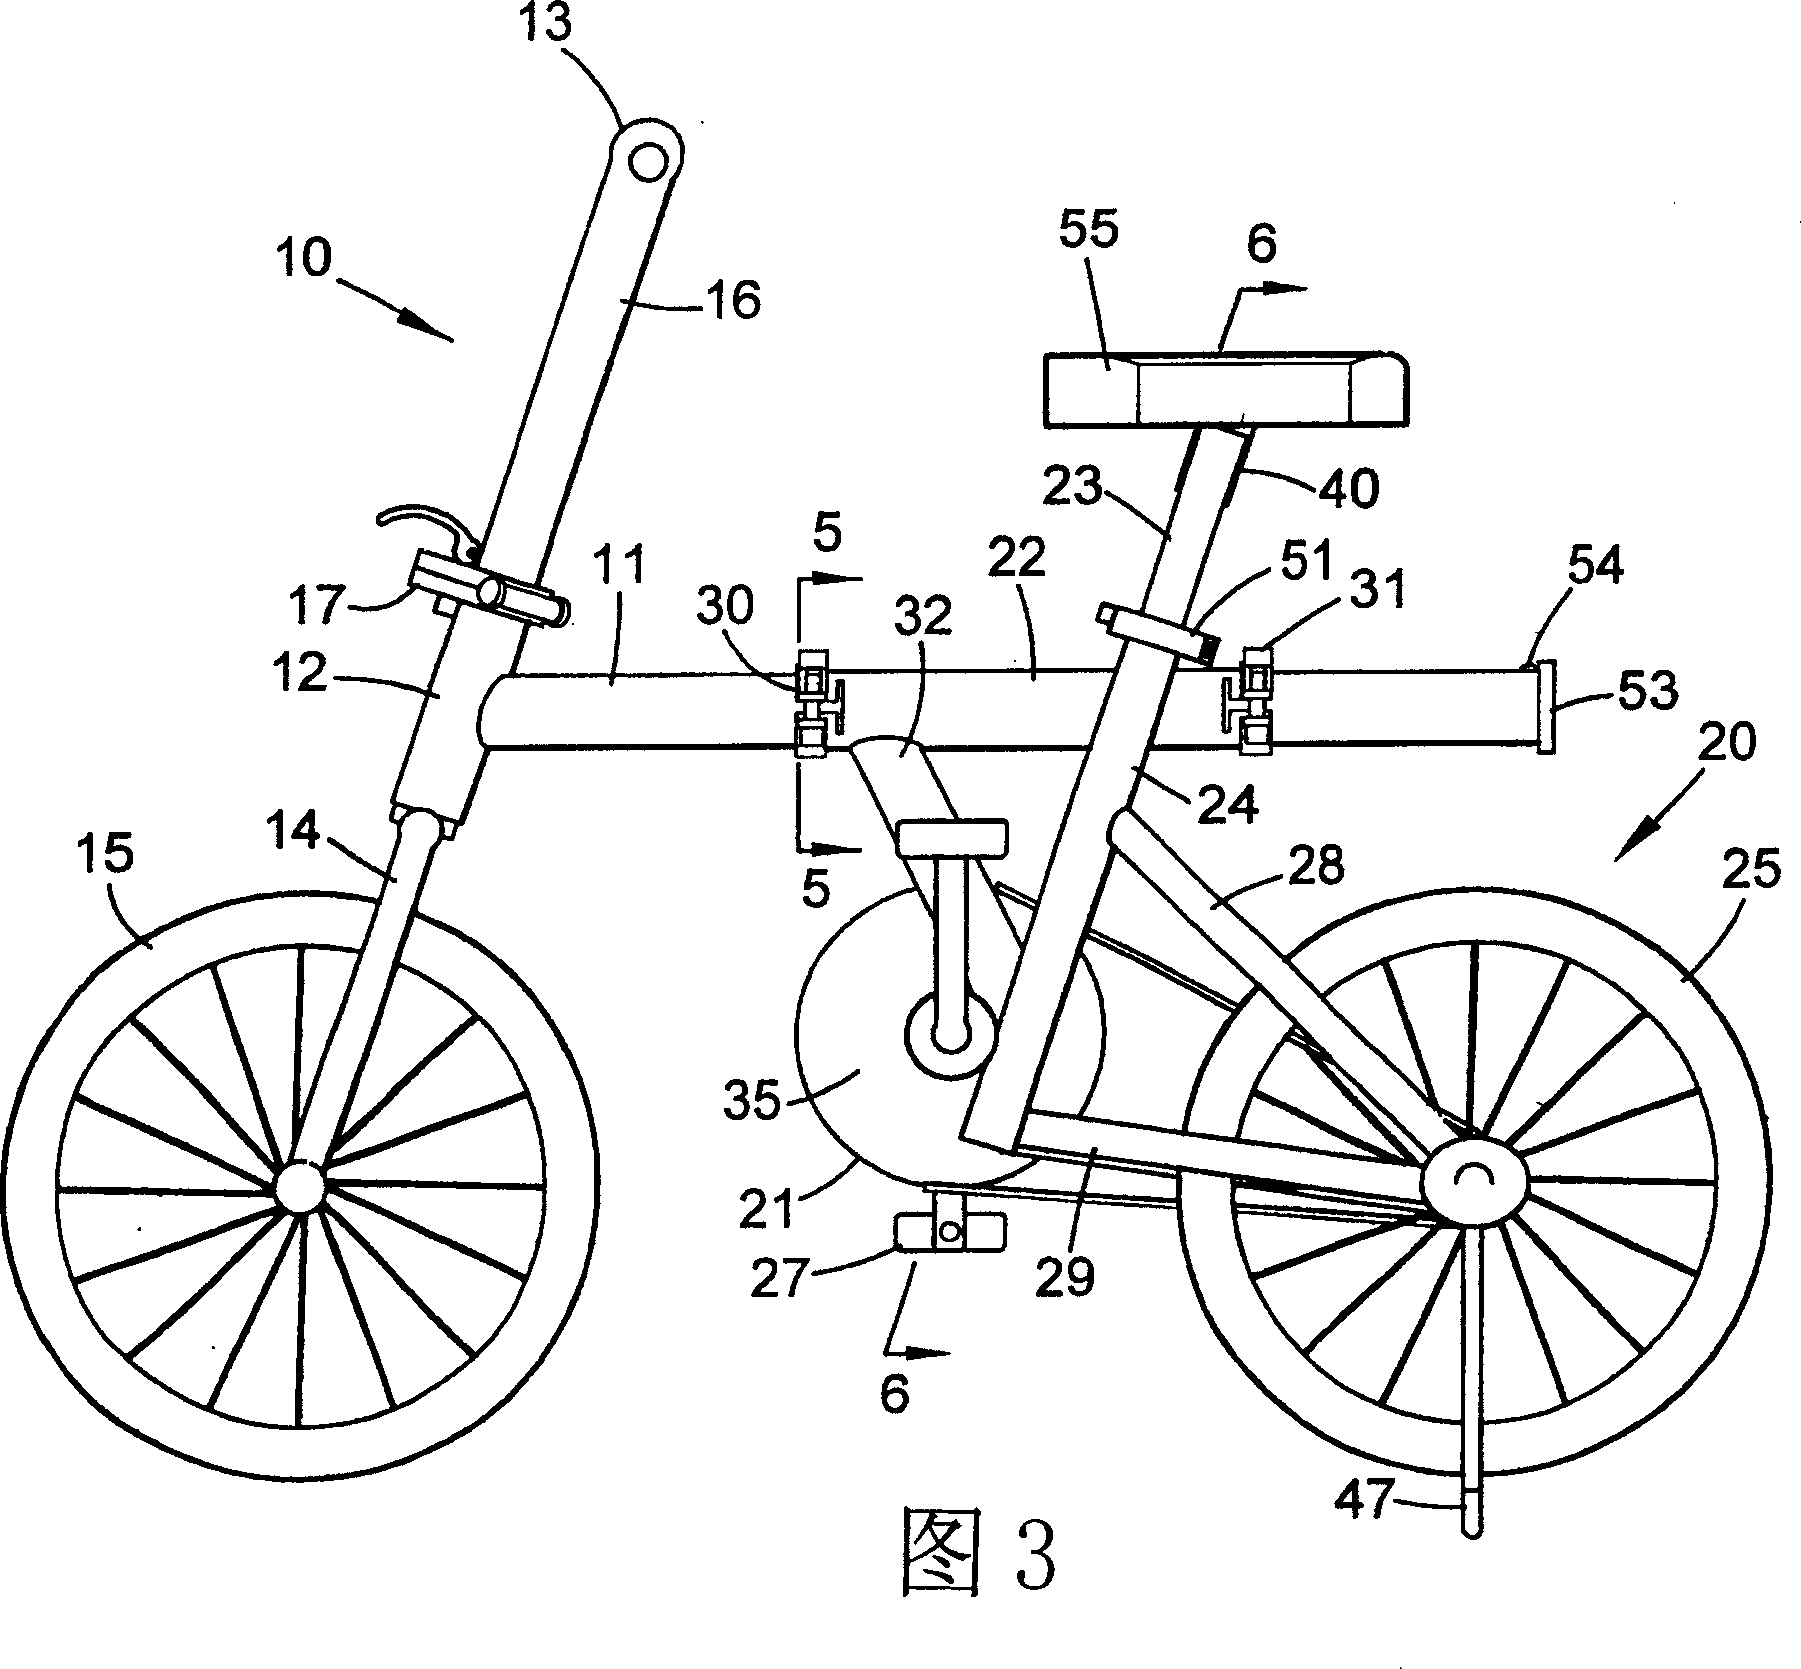 Collapsible bicycle